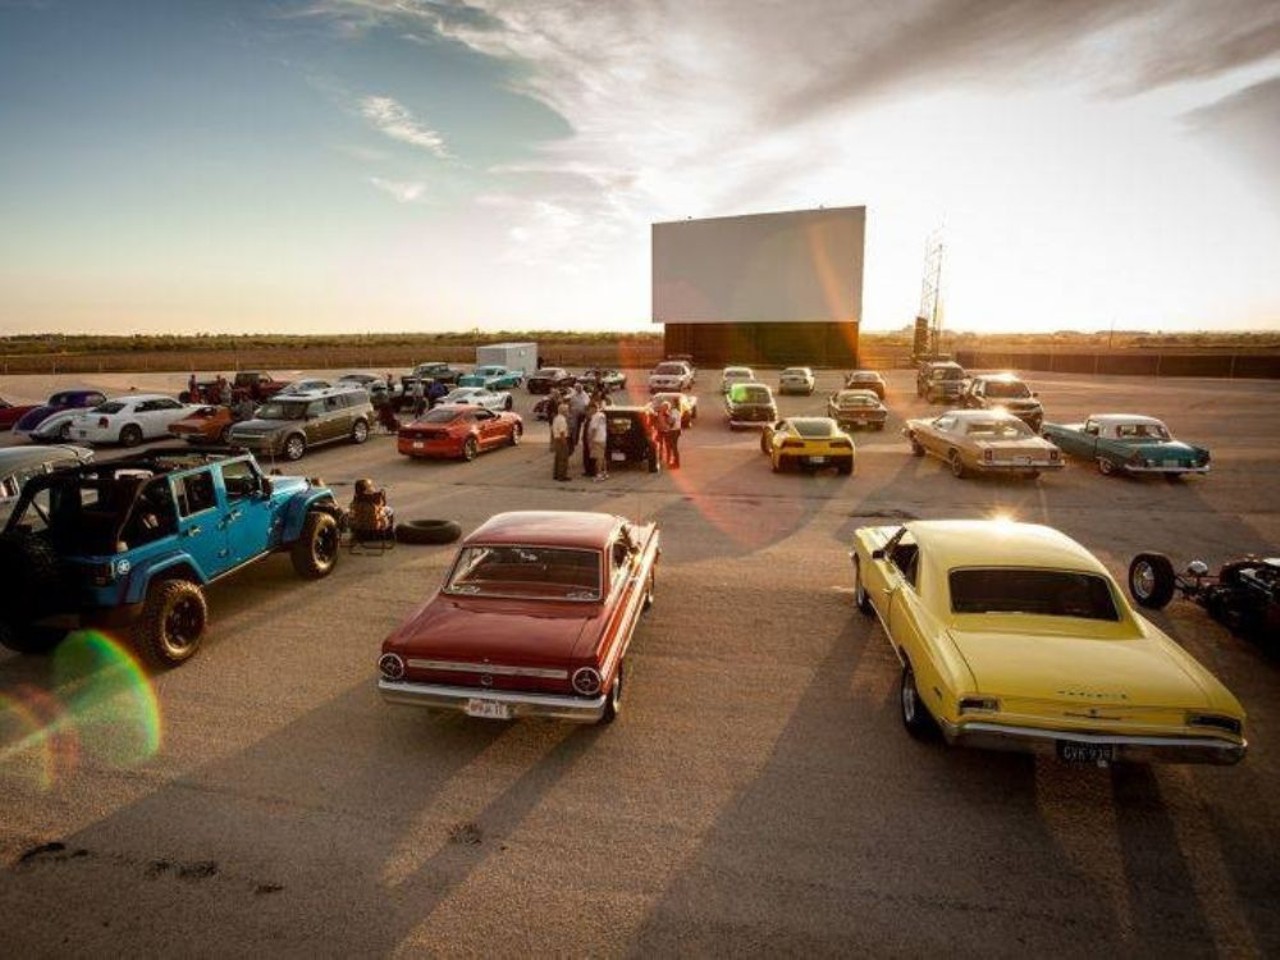 See a movie at the drive-in
1178 Kroescher Ln., New Braunfels, (830) 620-7469, driveinusa.com/nb
If you want to shake up your movie-going experience, you can head to the Stars & Stripes Drive-In in New Braunfels to enjoy a movie on the big screen from inside your air-conditioned vehicle.